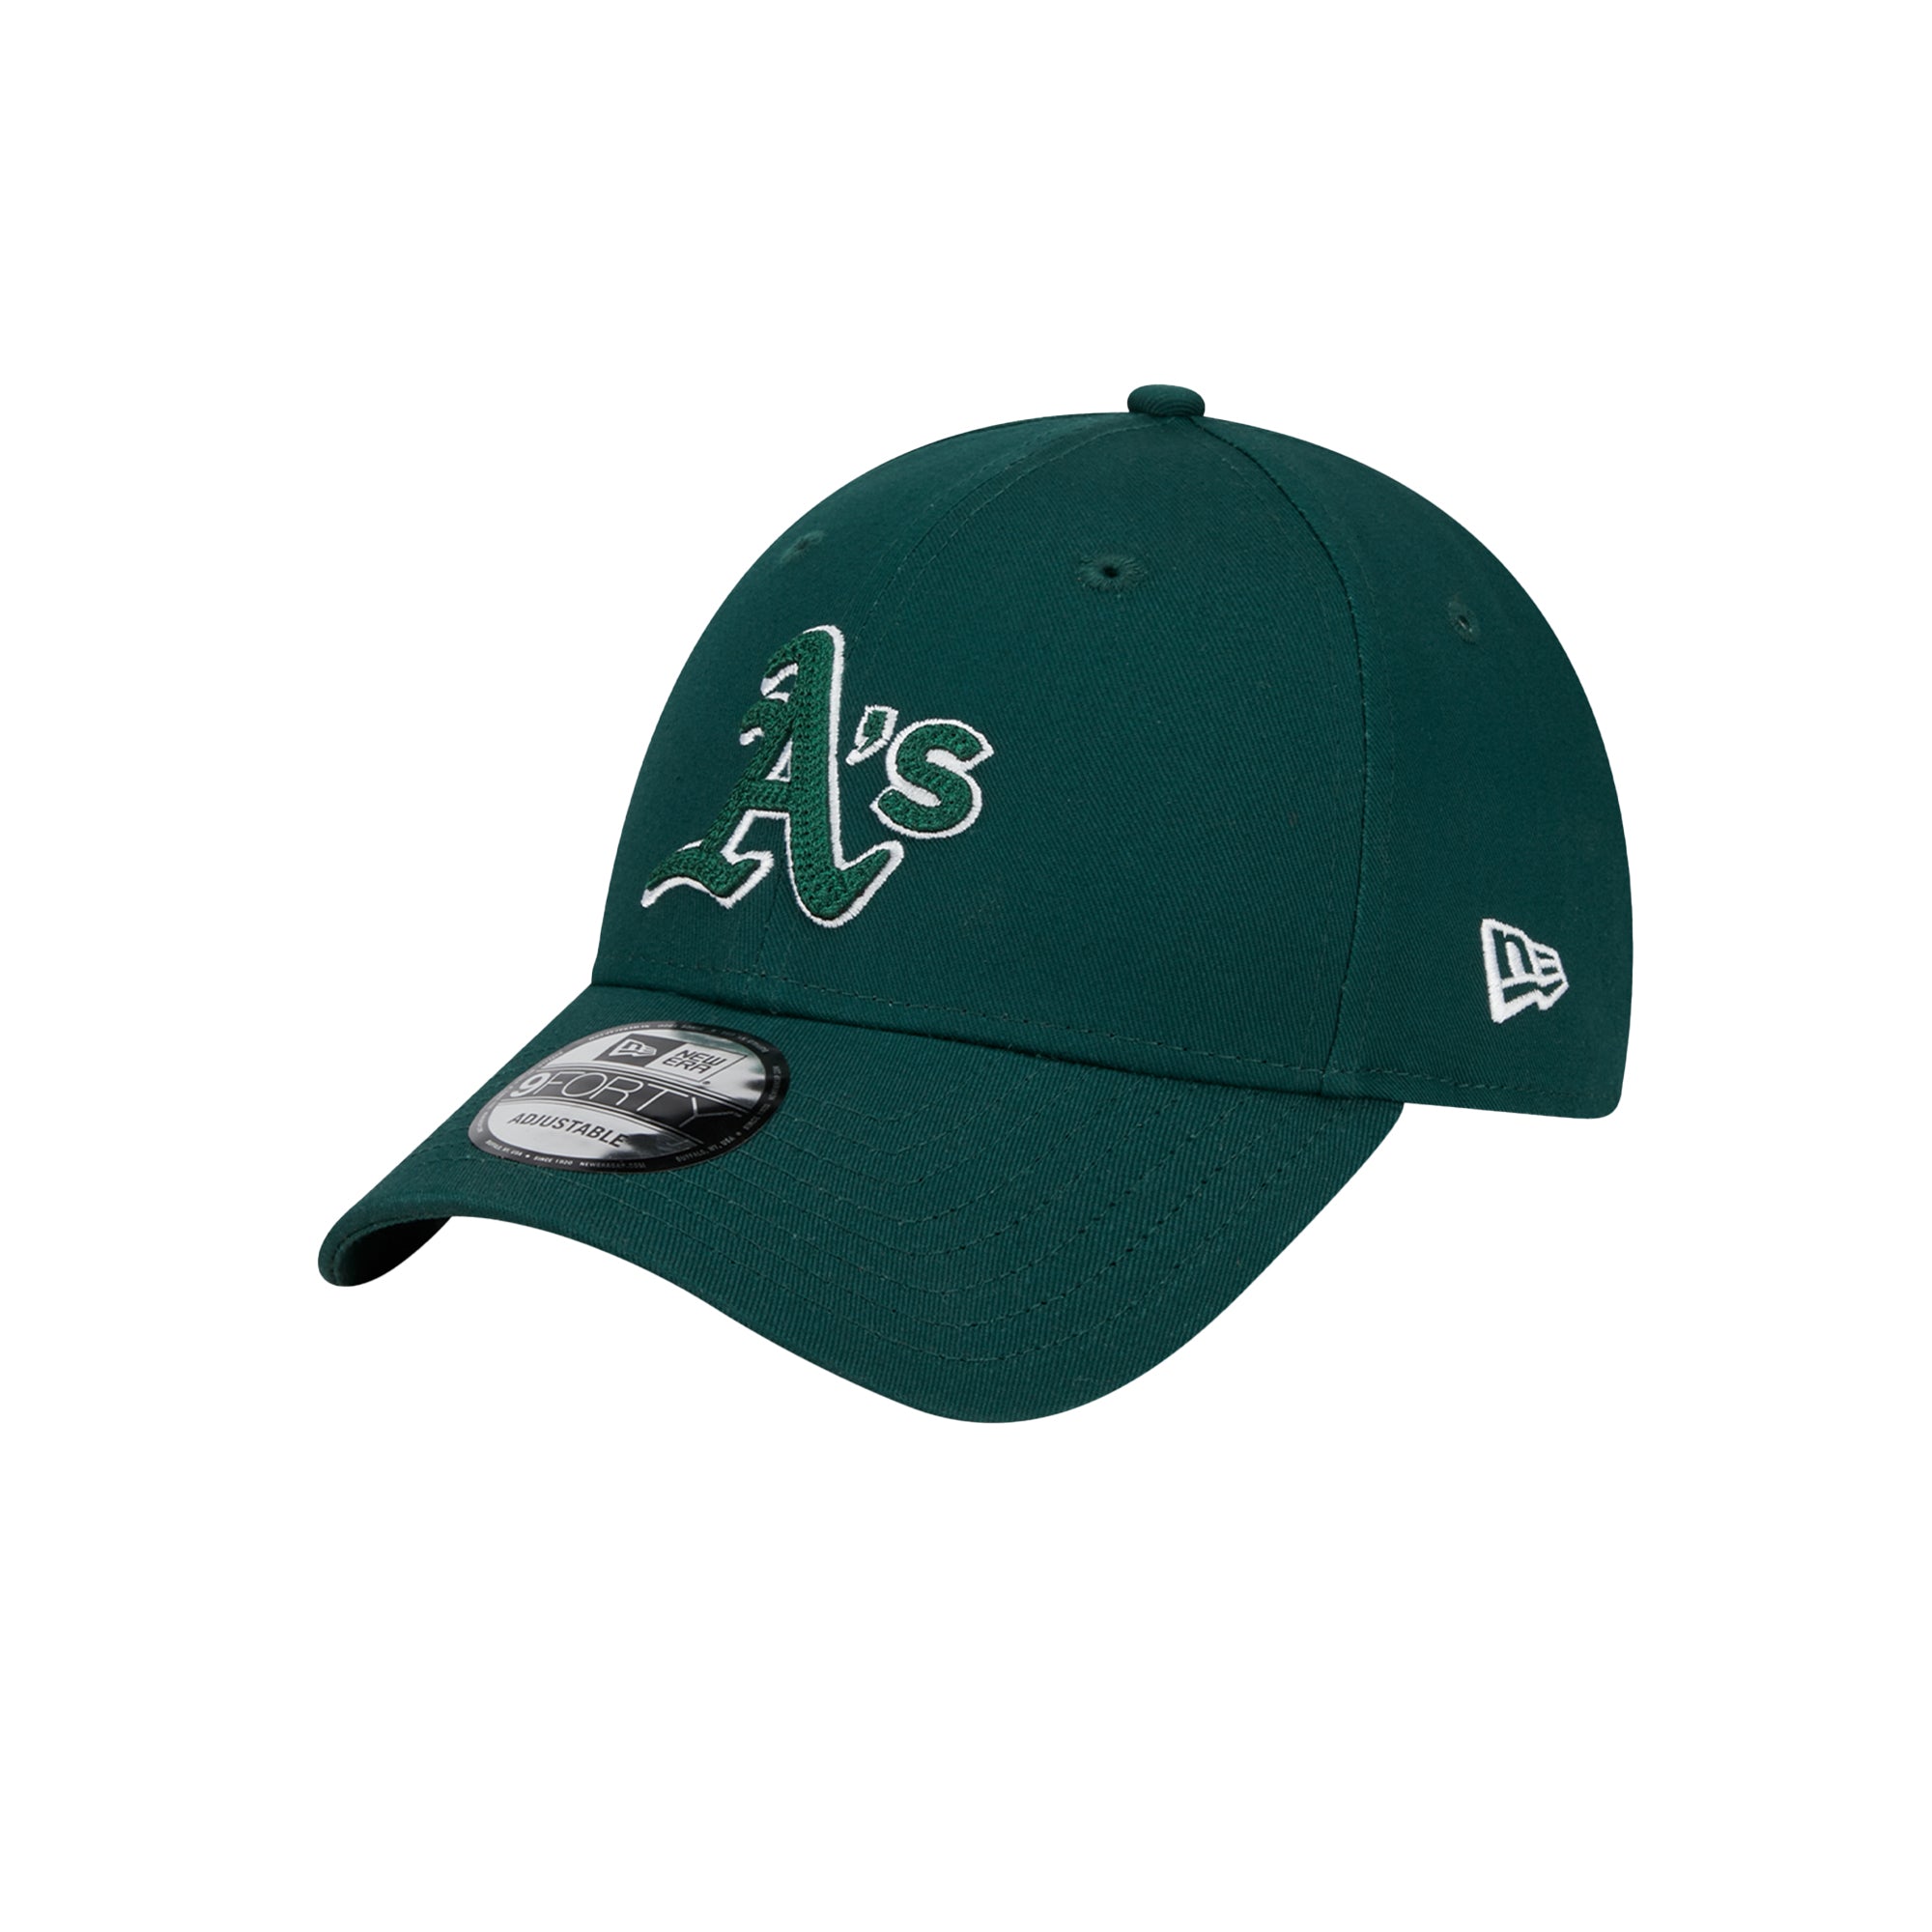 Oakland Athletics New Traditions Green 9FORTY Adjustable